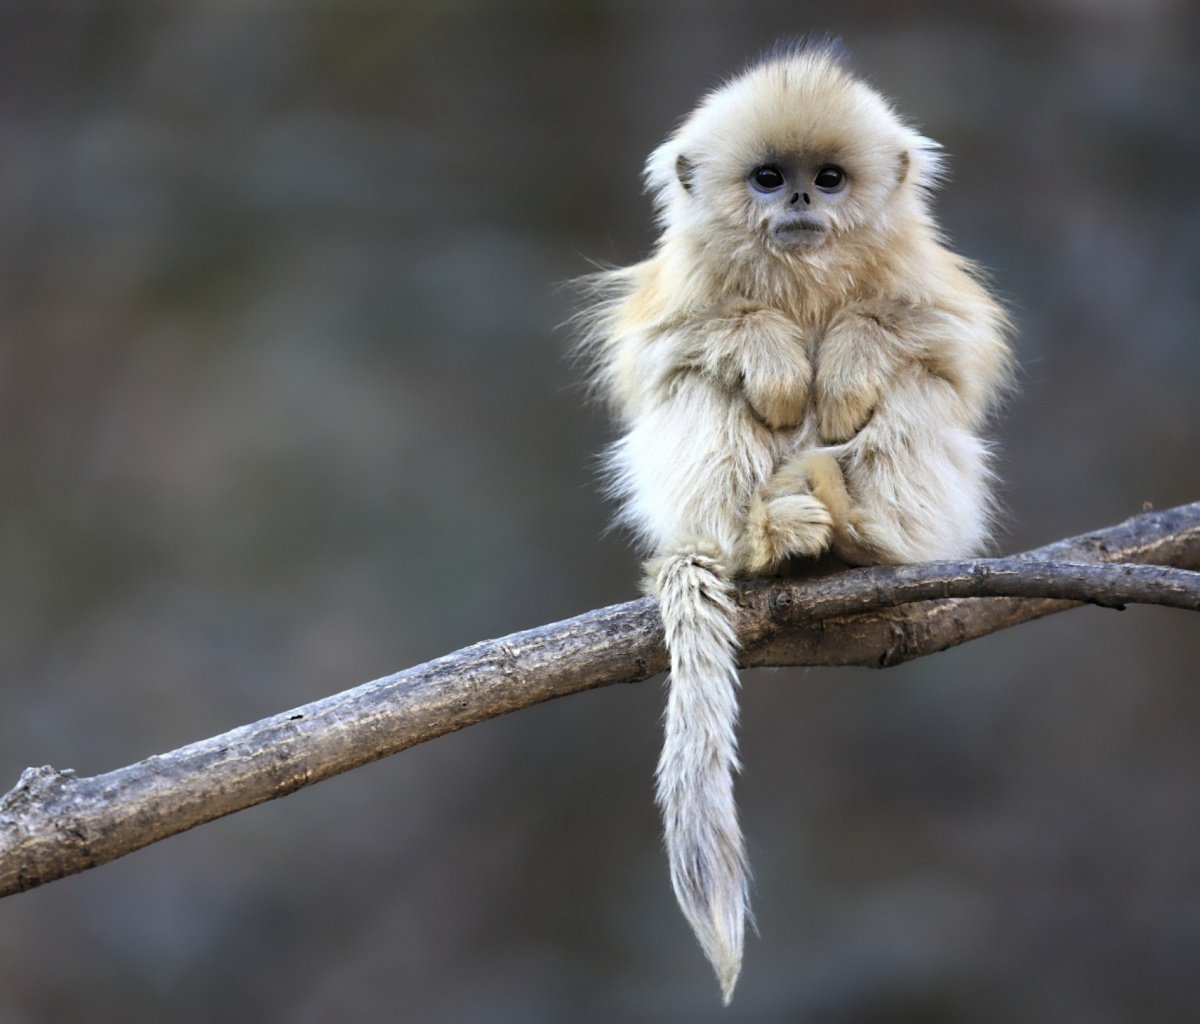 Cute Baby Monkeys 9472 Hd Wallpapers in Animals   Imagescicom